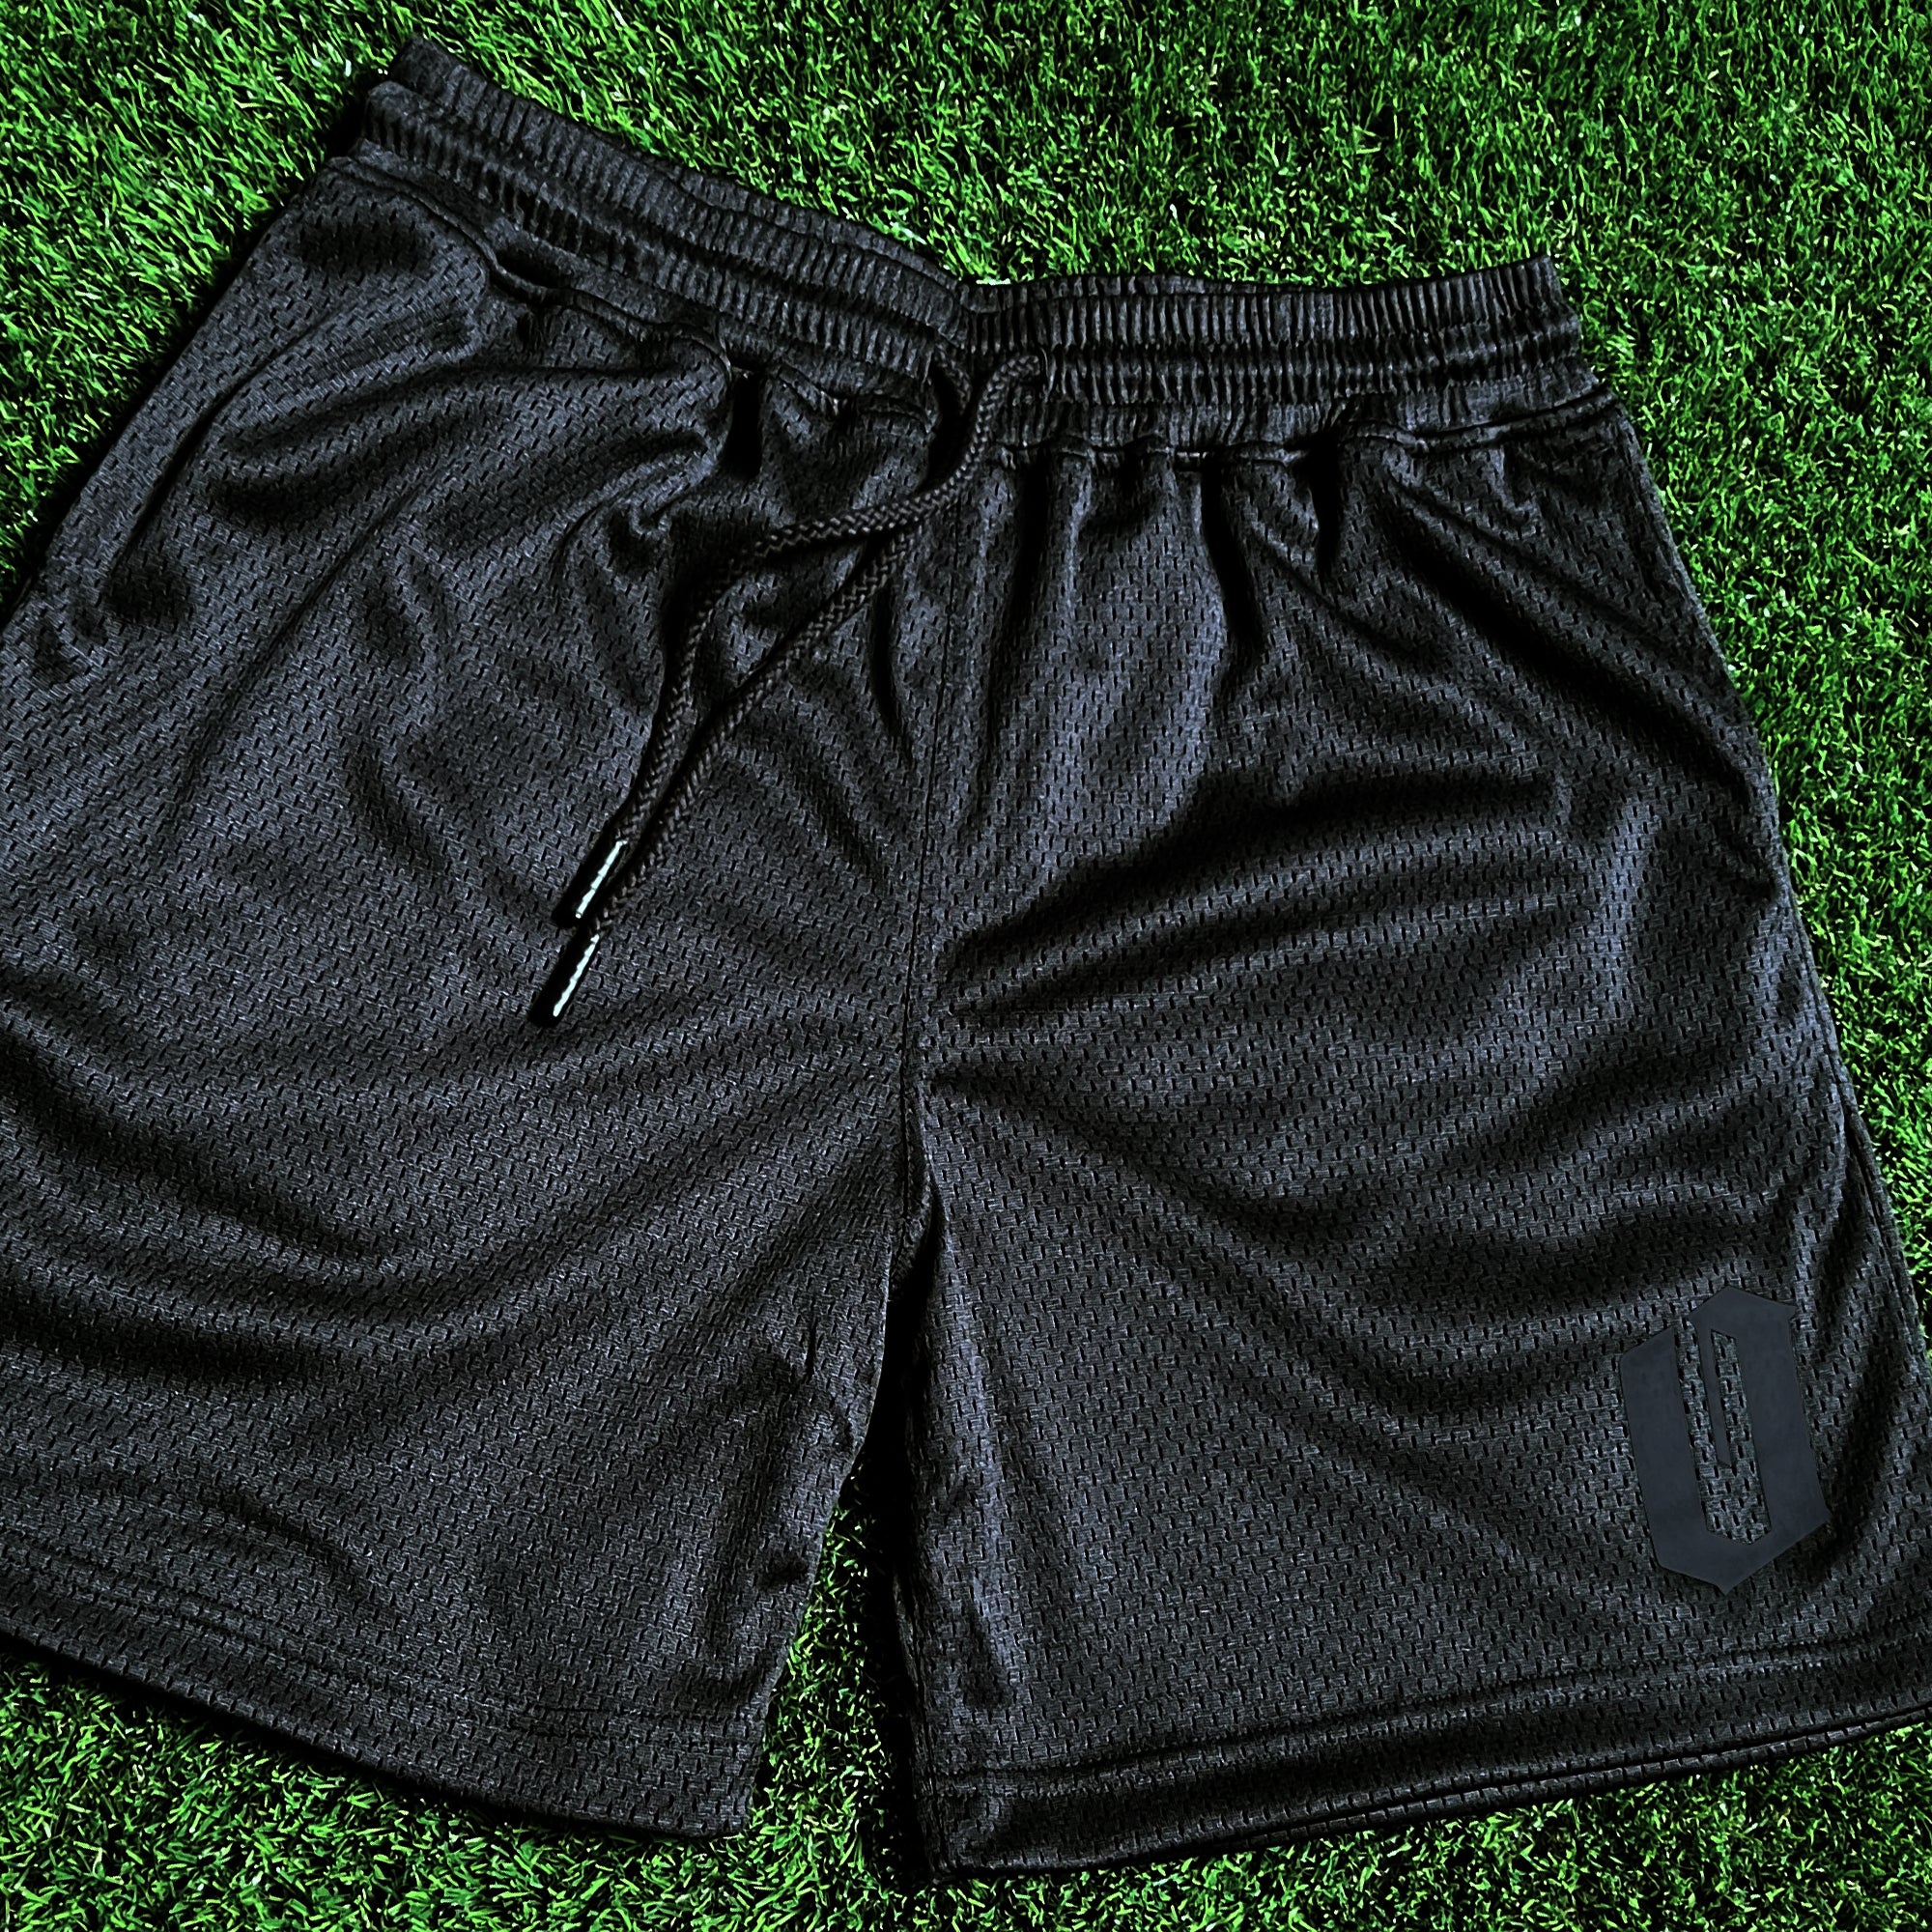 Men’s black mesh athletic shorts with O for Oakland Official logo on the bottom of left leg on green grass. 